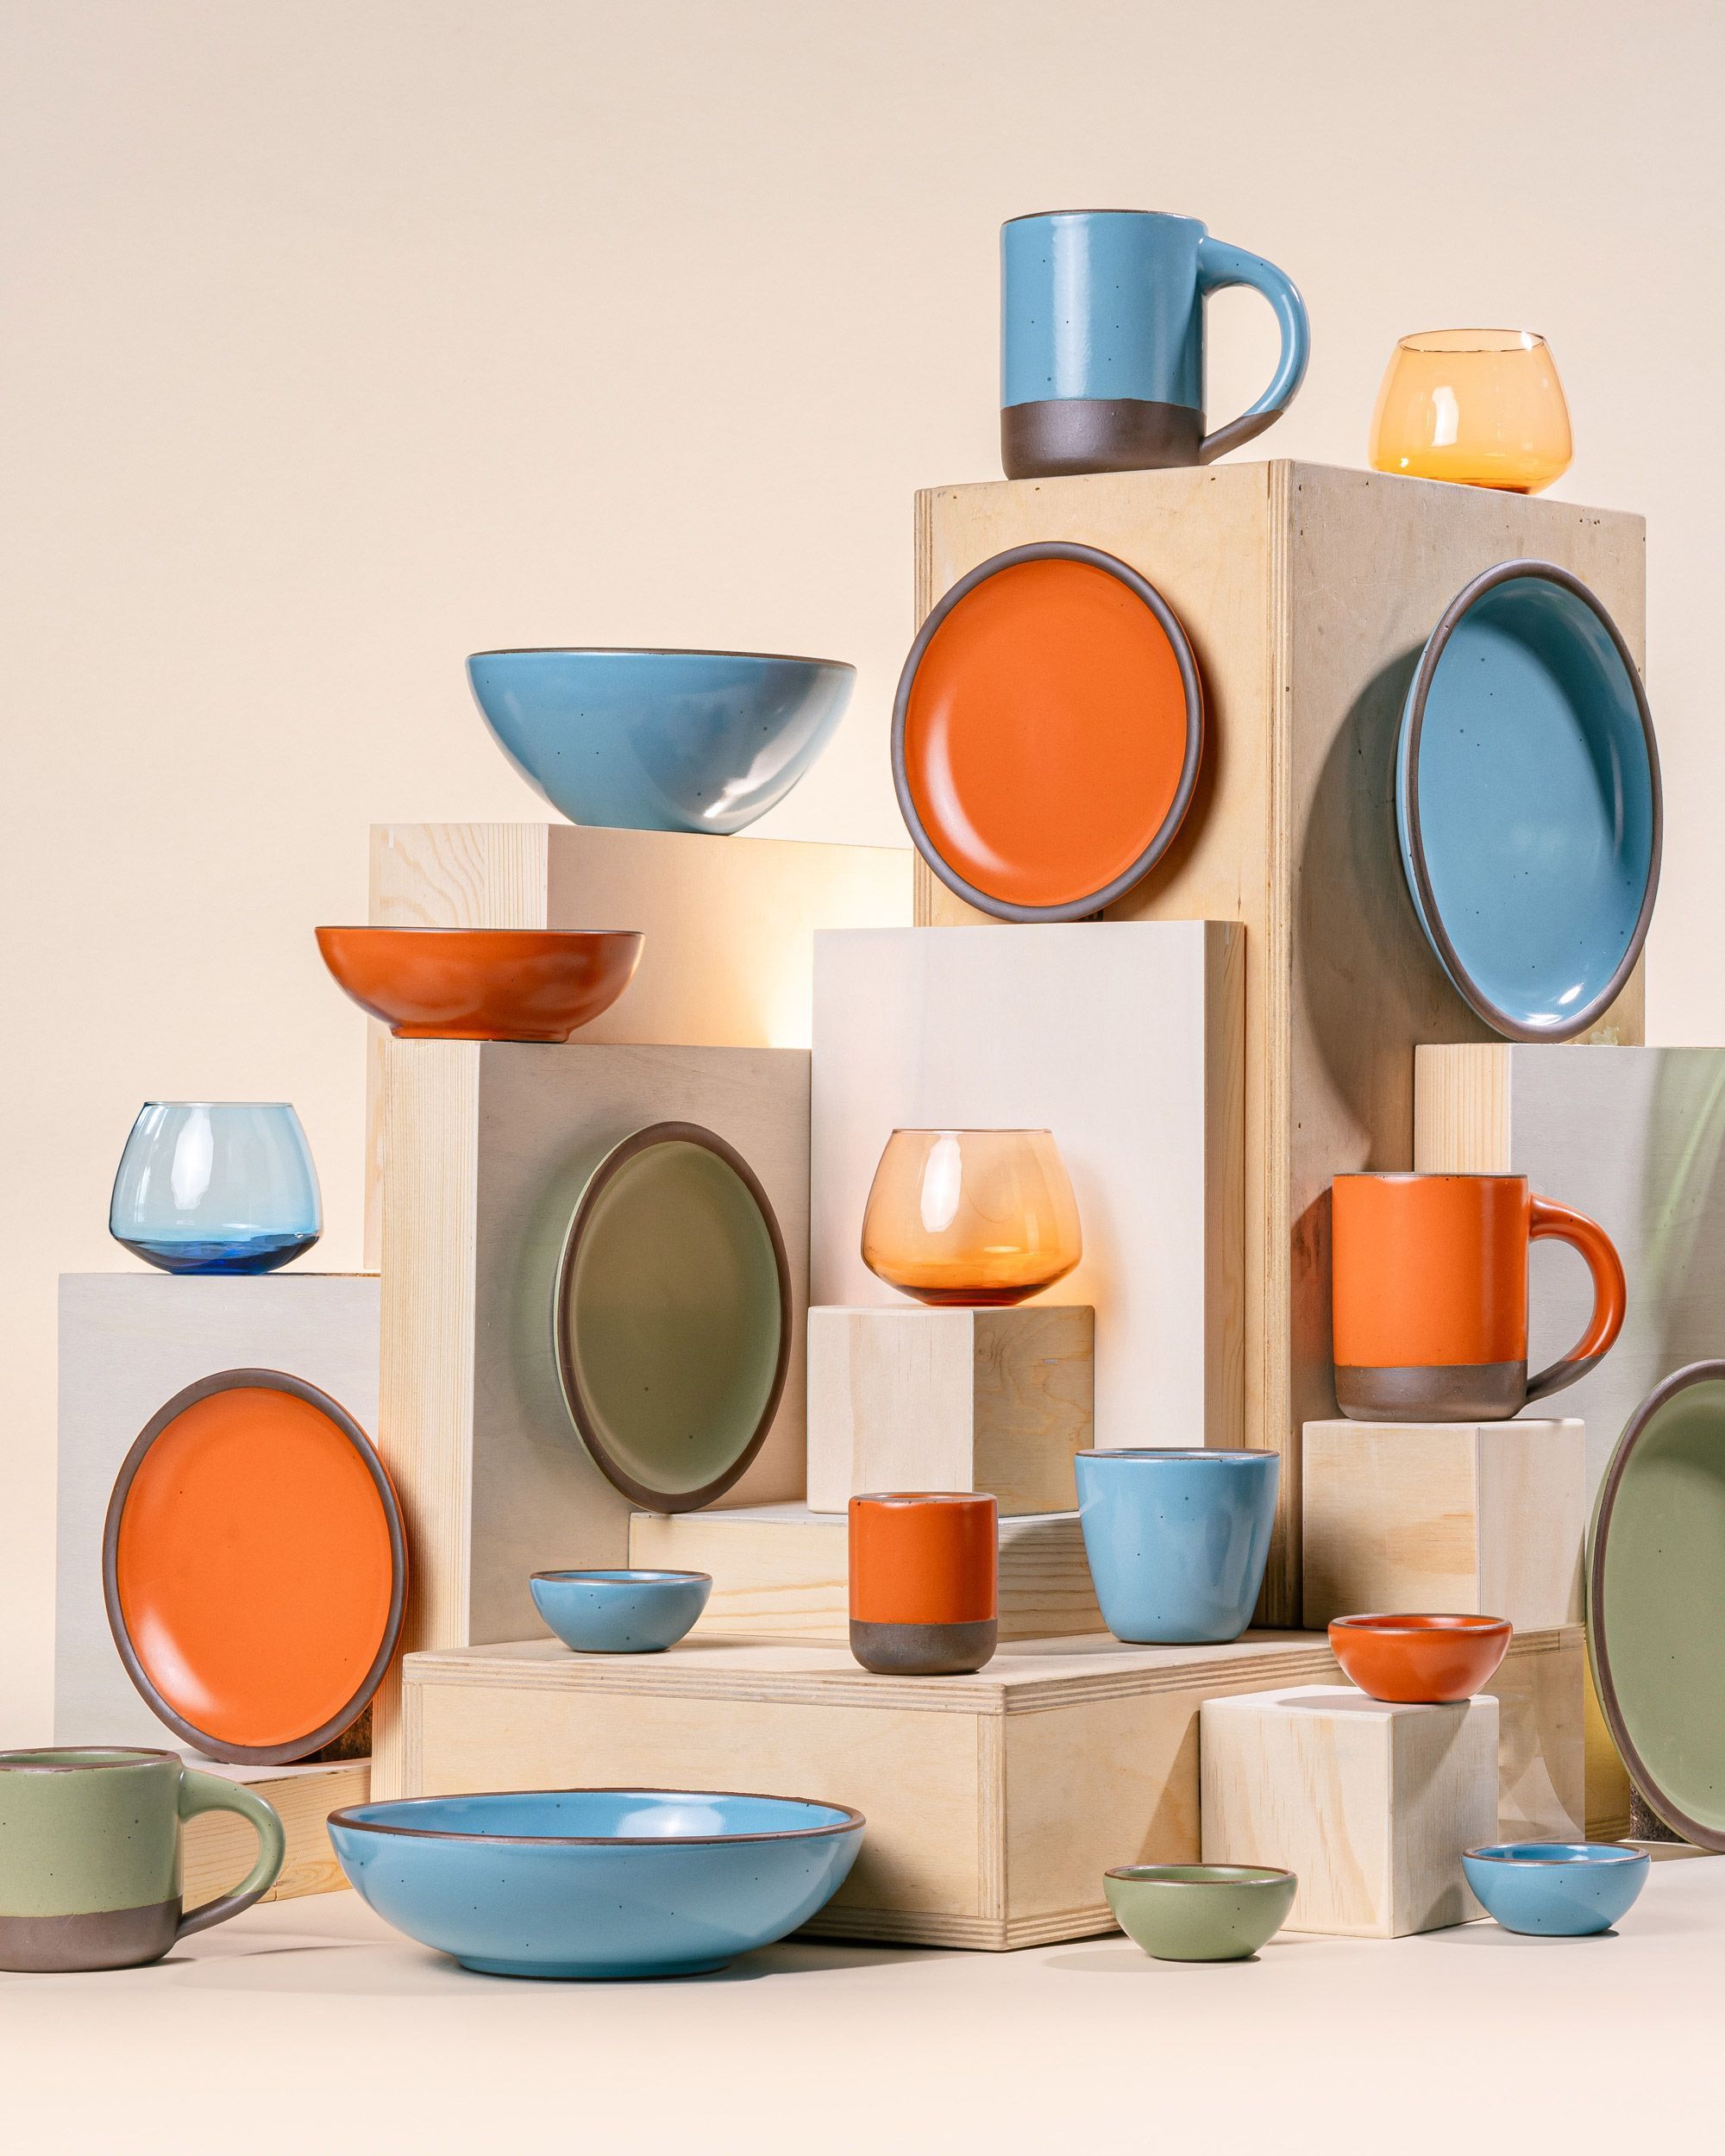 An artful arrangement of ceramic dinnerware in bold orange, calming sage, and robin's egg blue colors, arranged at various heights and positions on wooden risers.